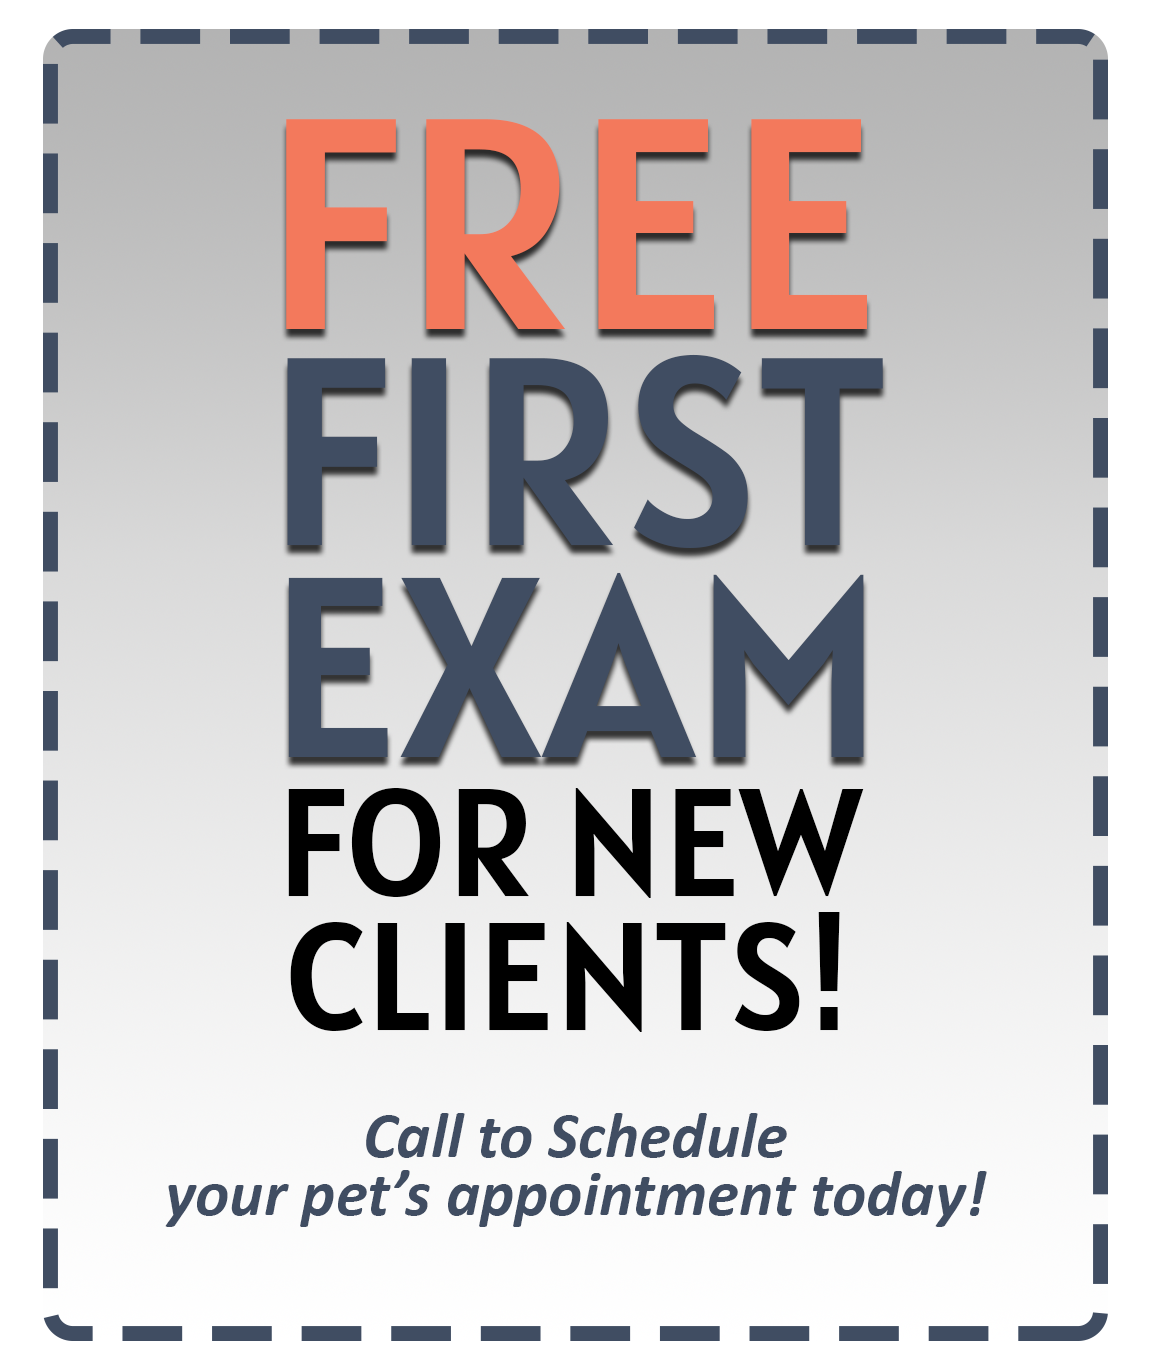 Free First Exam For New Clients